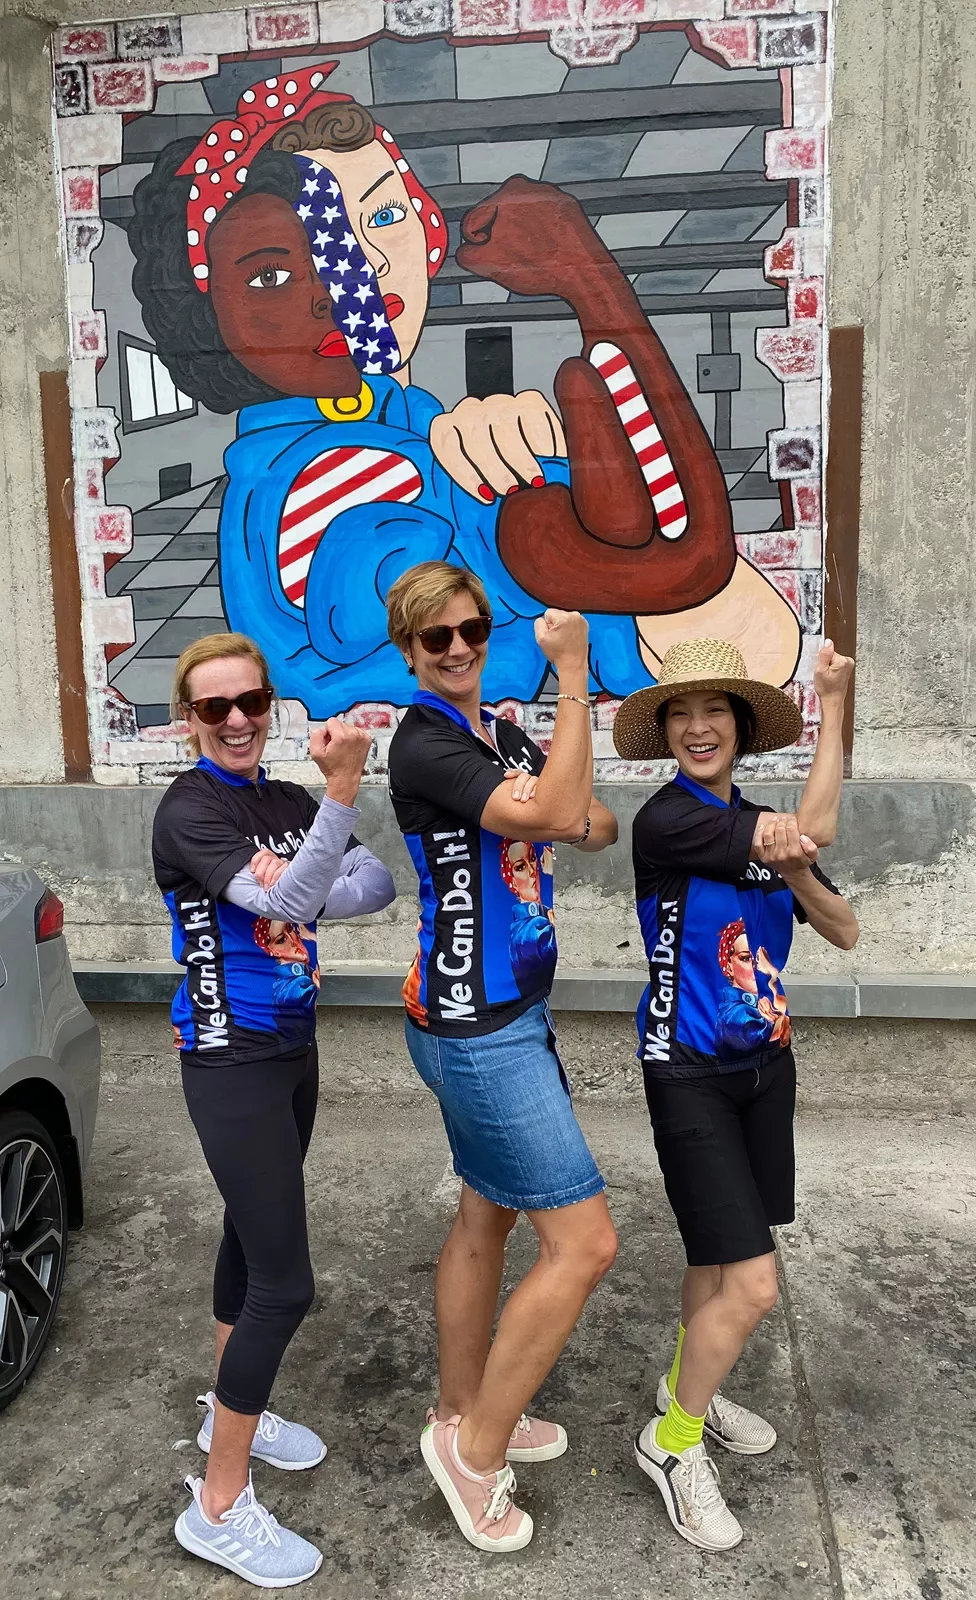 Three guests posing in front of Rosie the Riveter mural, doing her pose.